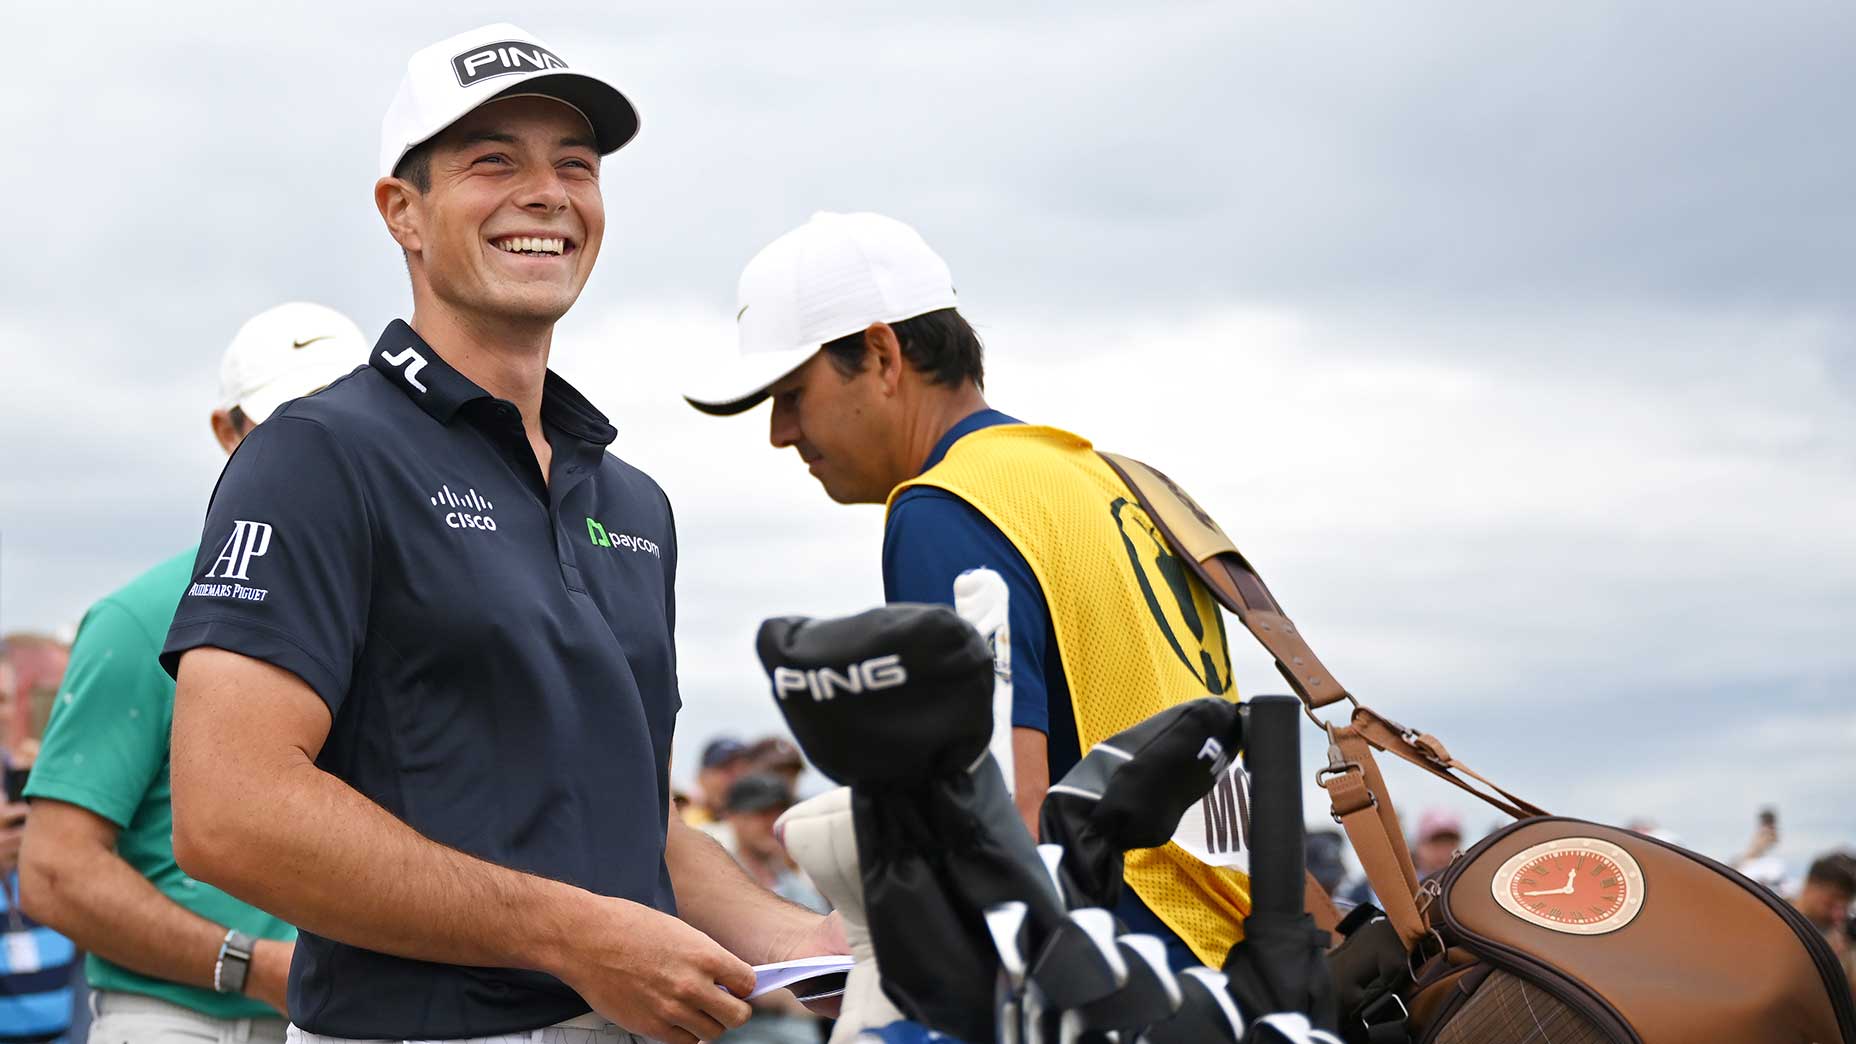 Viktor Hovland smiles during the third round of the open championship.